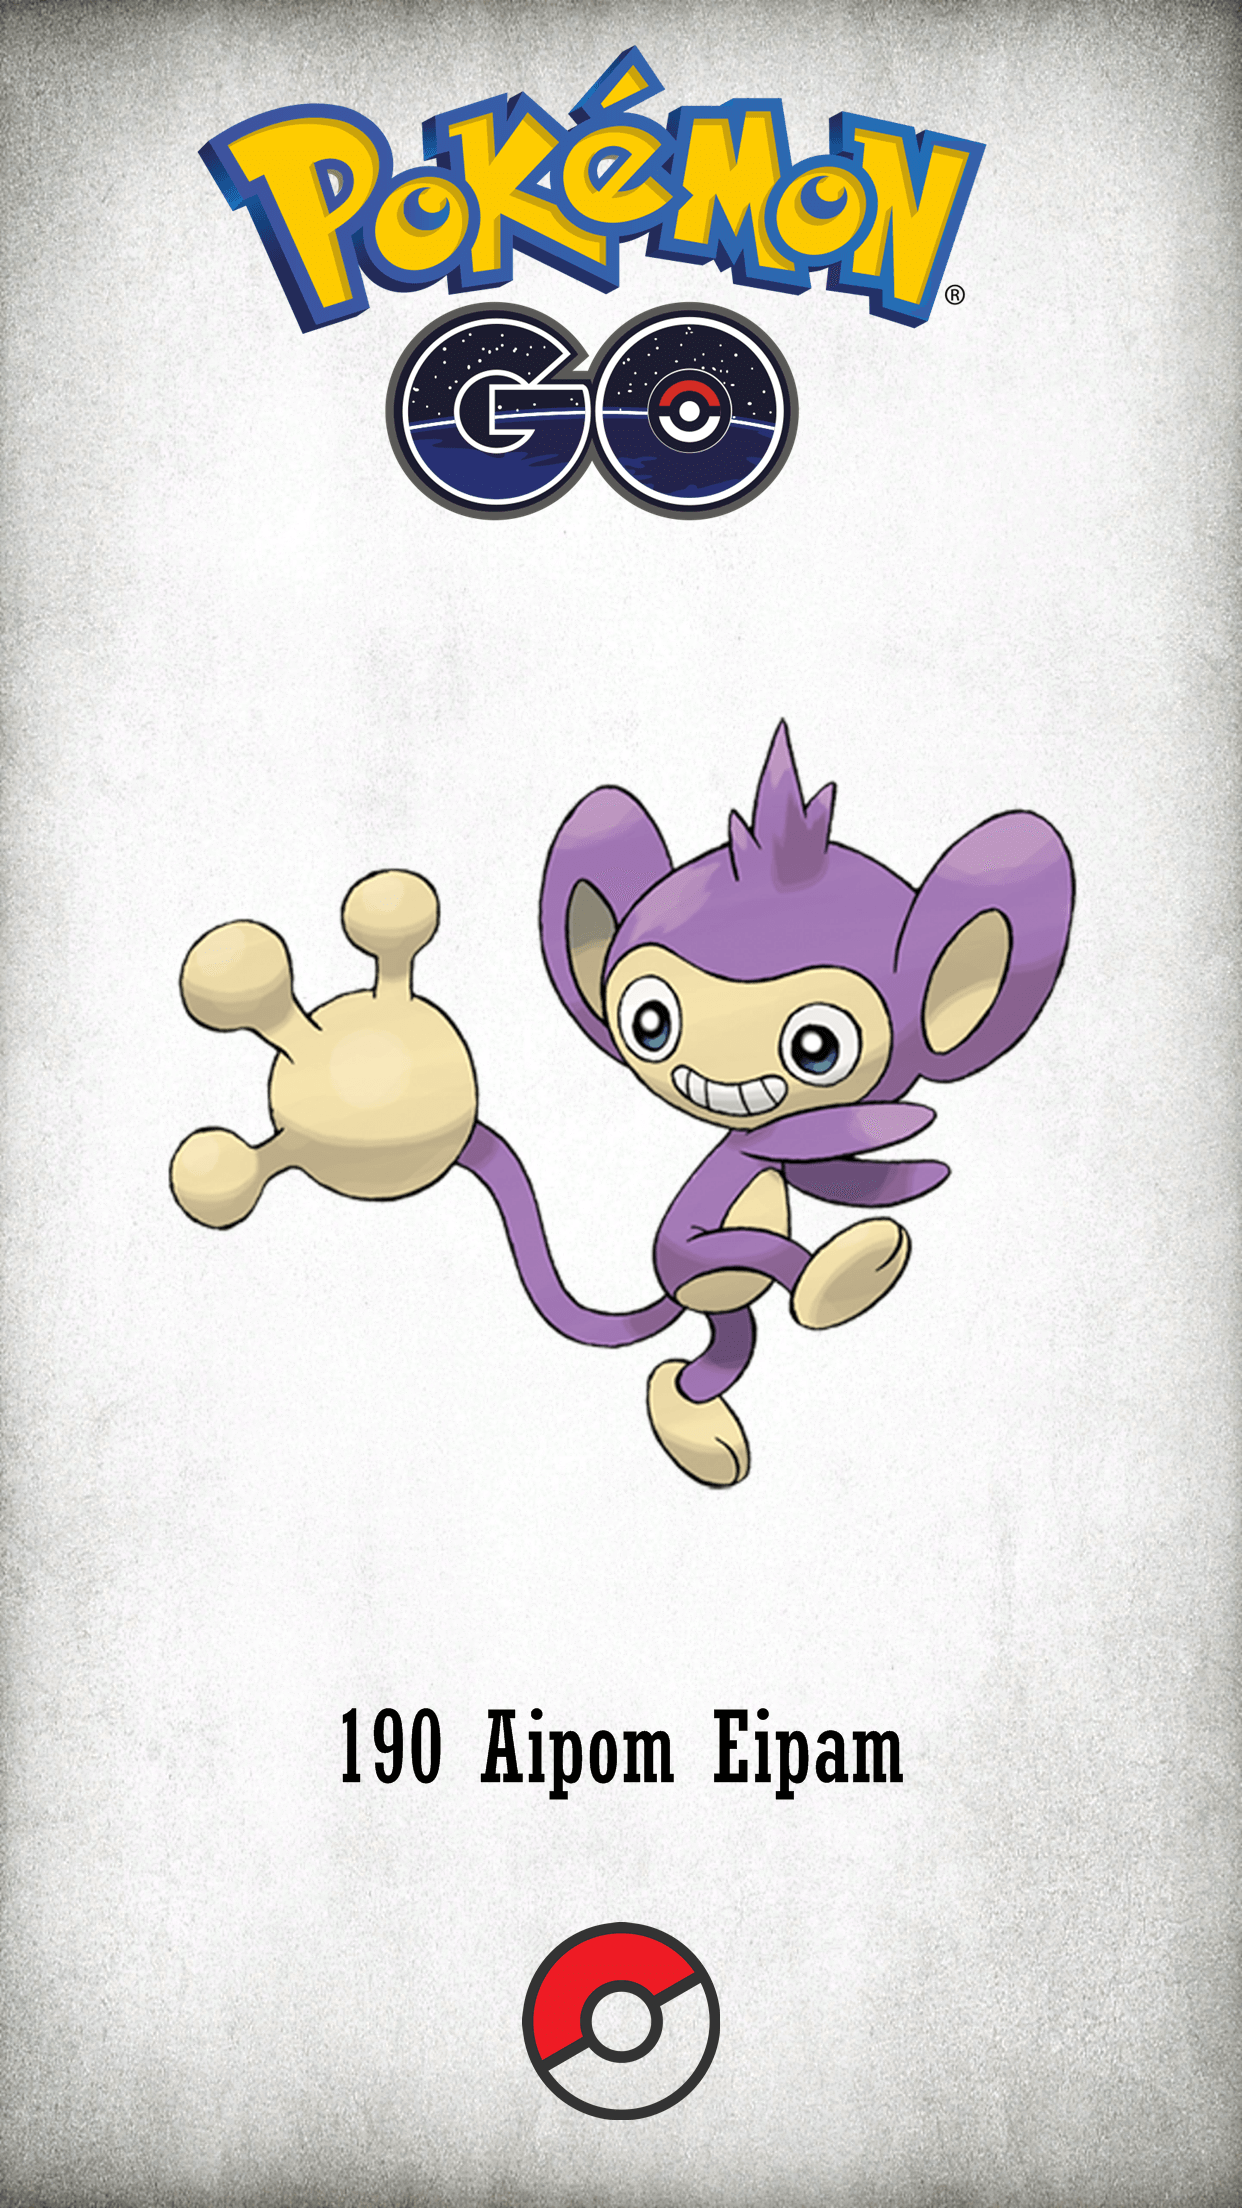 Character Aipom Eipam